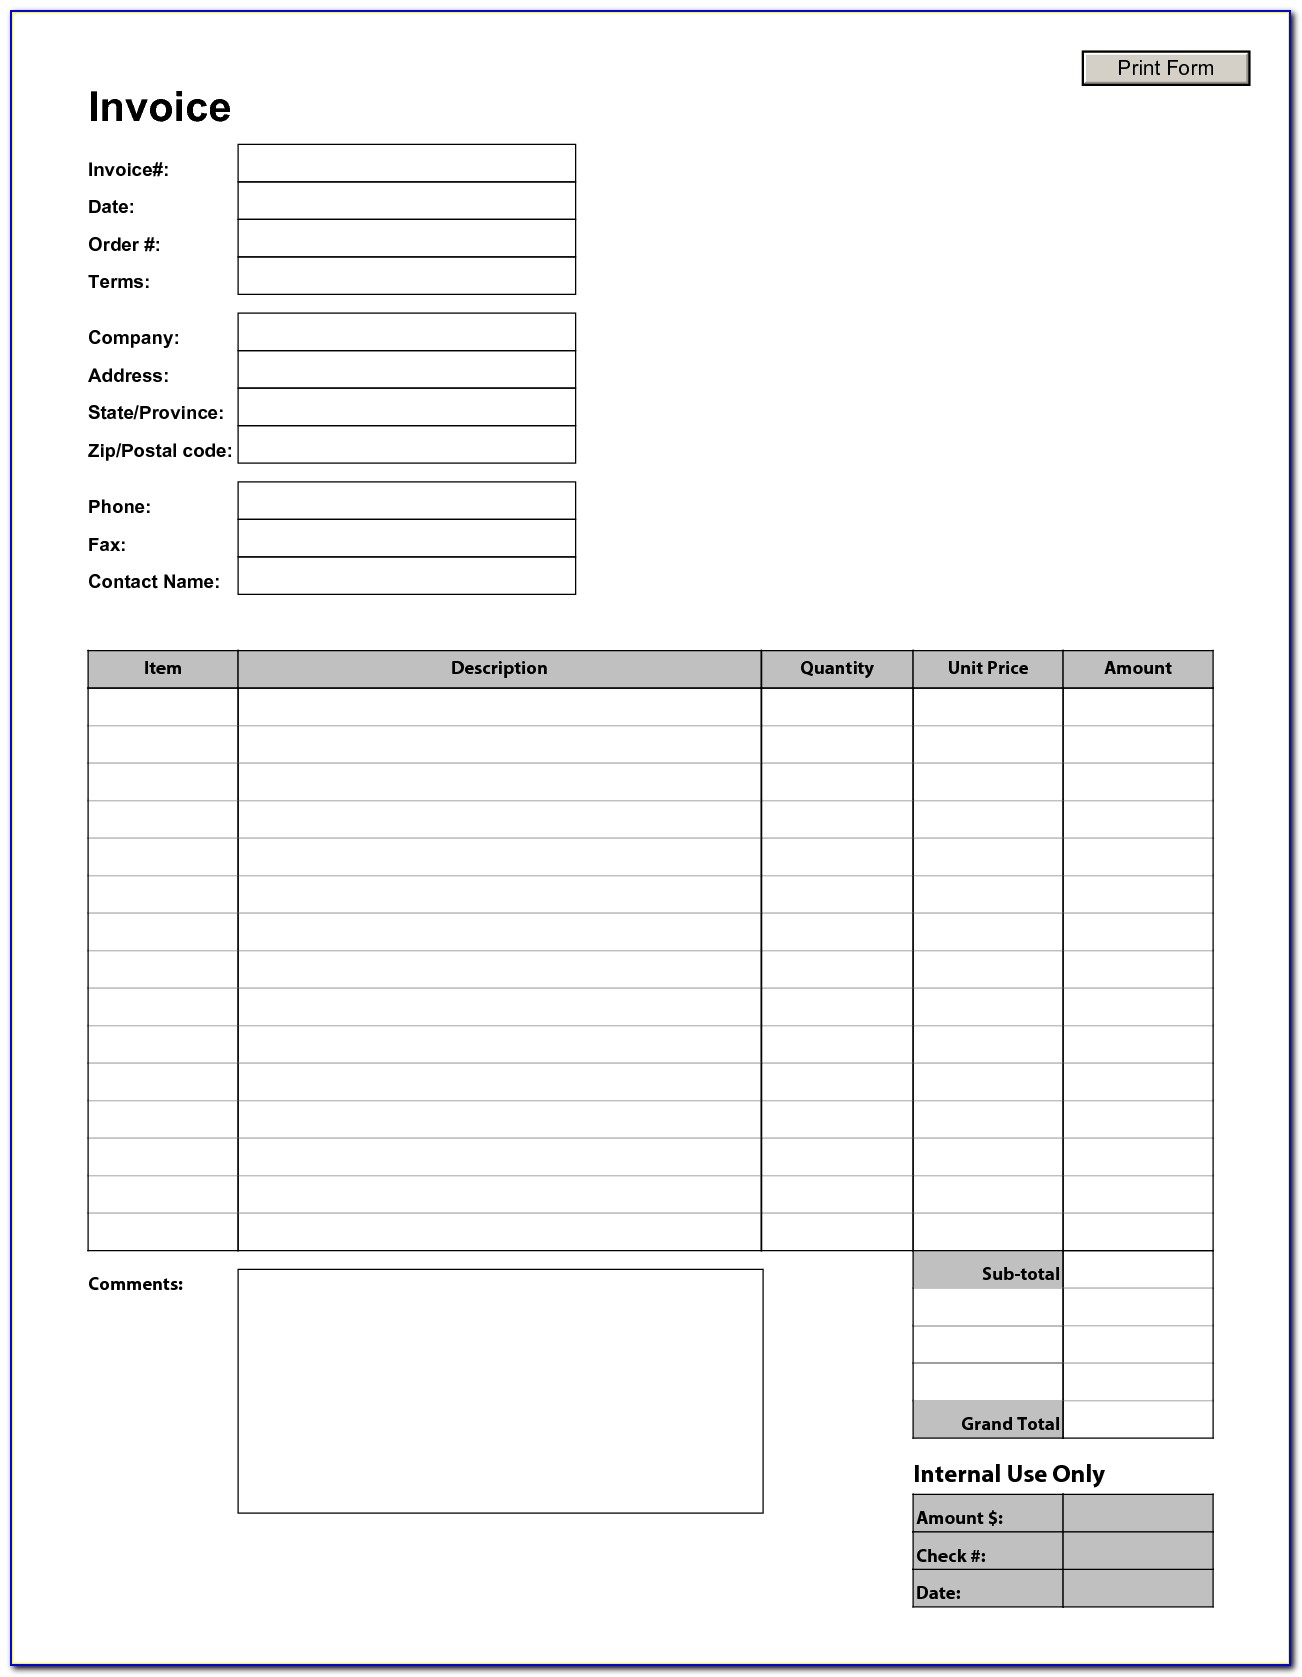 Invoice Format For Contractors